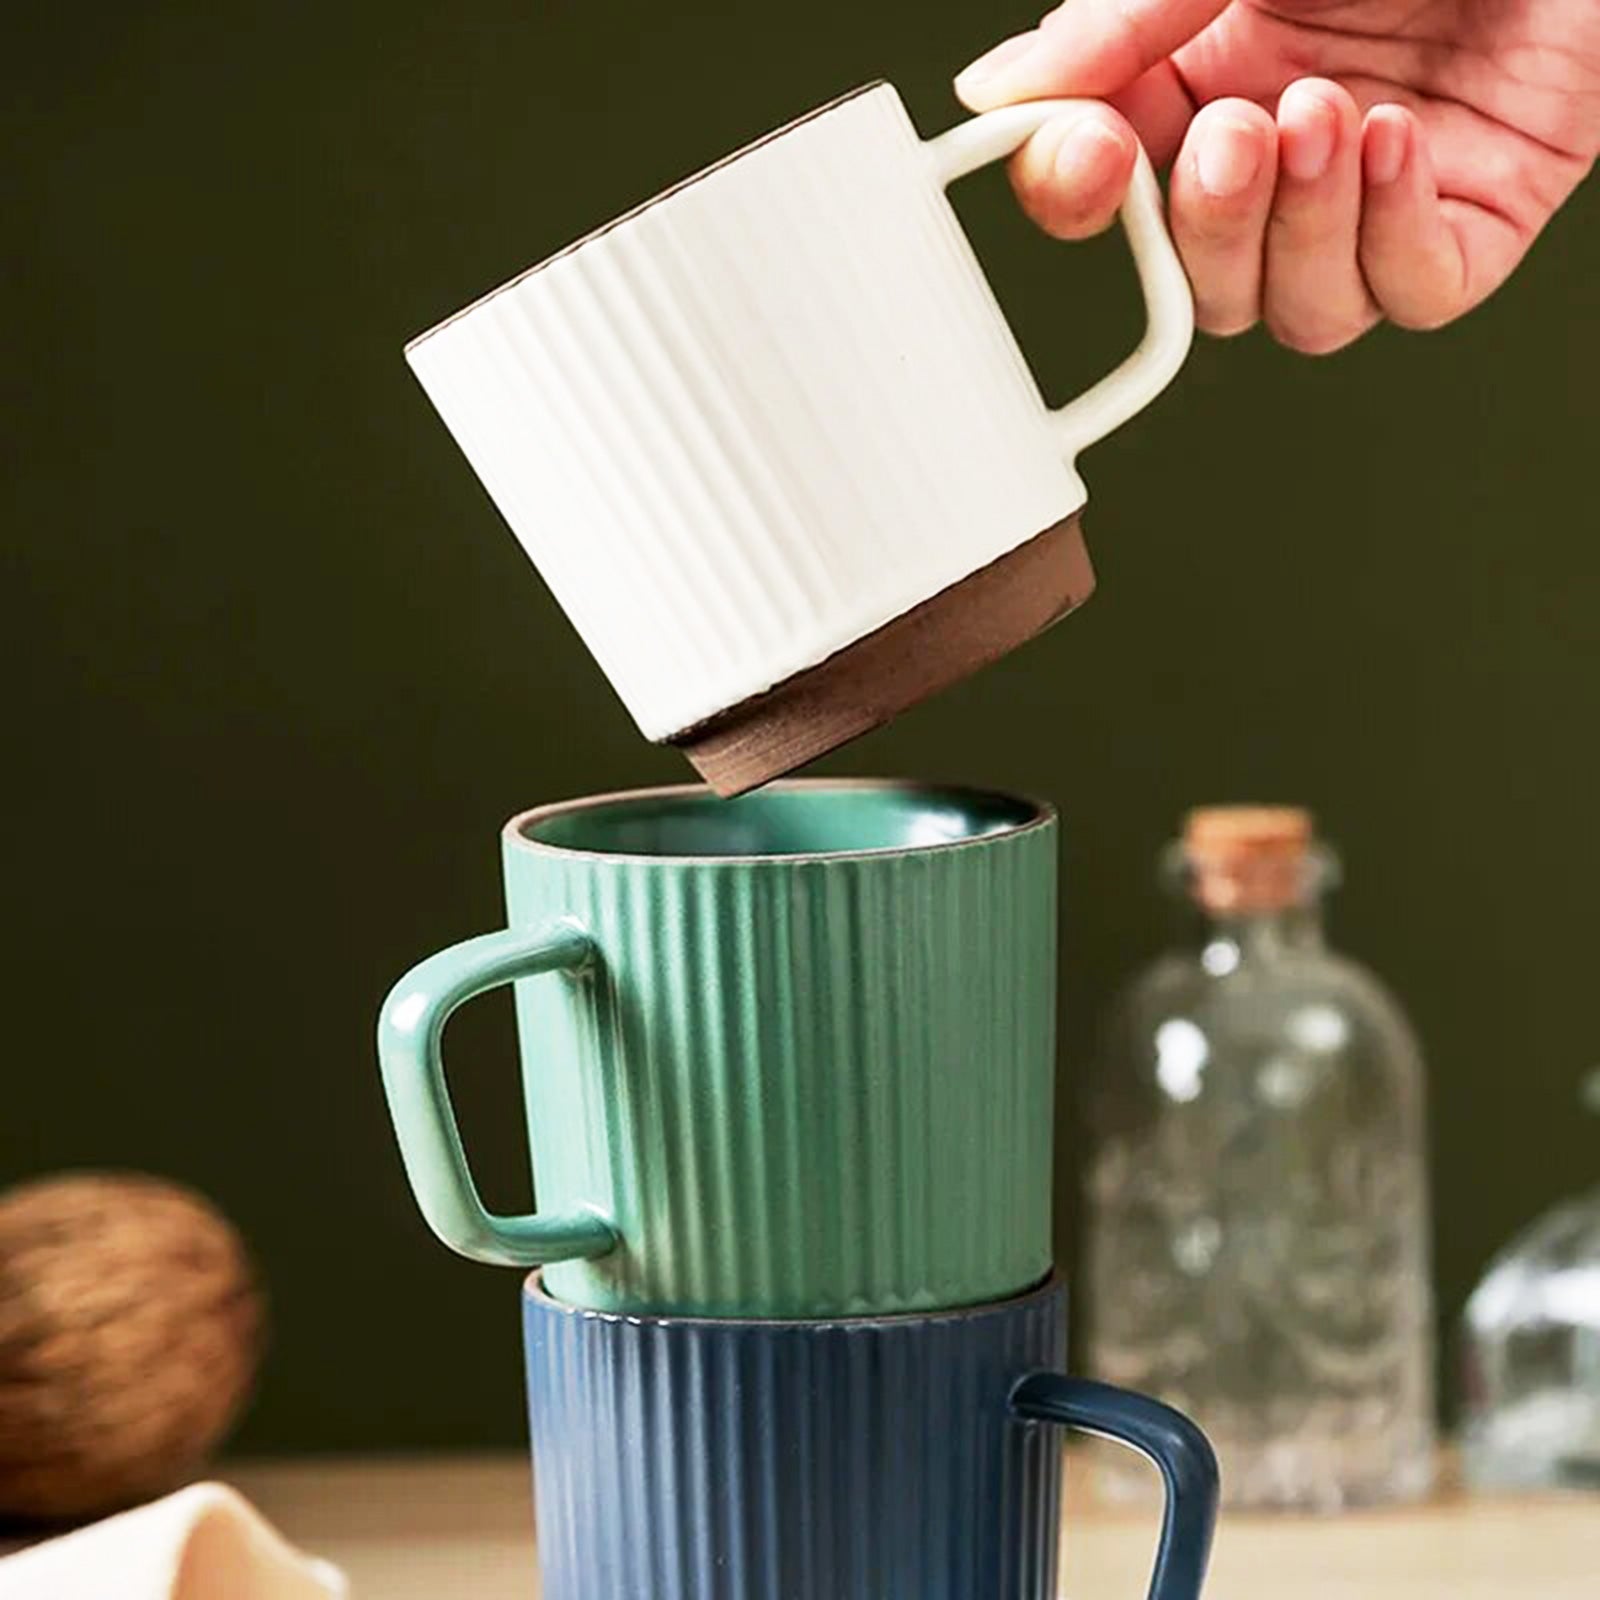 Timeless Retro Mugs for a Touch of Vintage Elegance